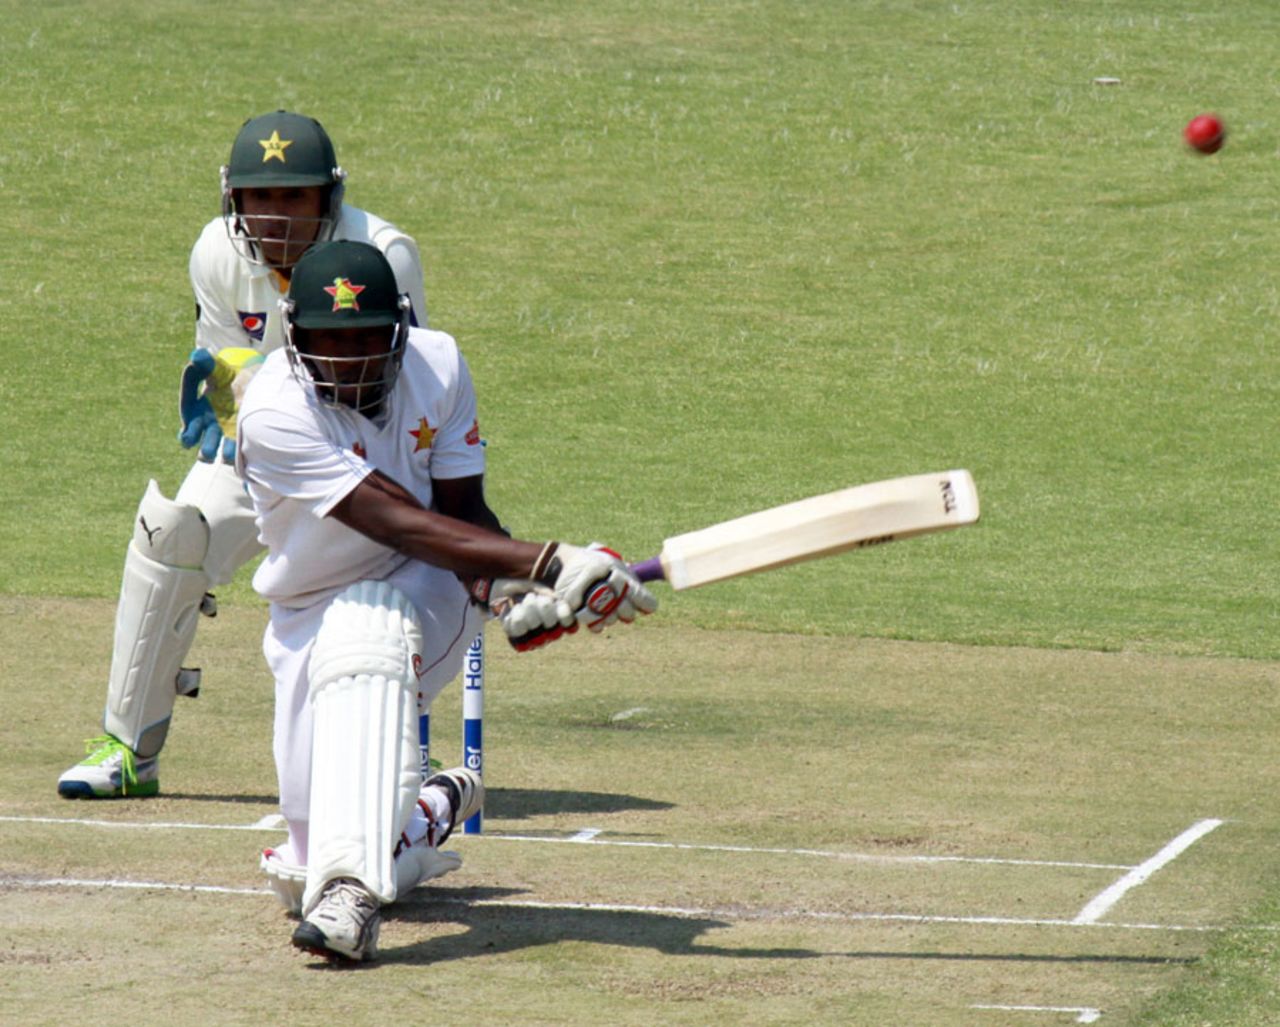 Tendai Chatara sweeps the ball, 2nd Test, Harare, 2nd day, September 11, 2013